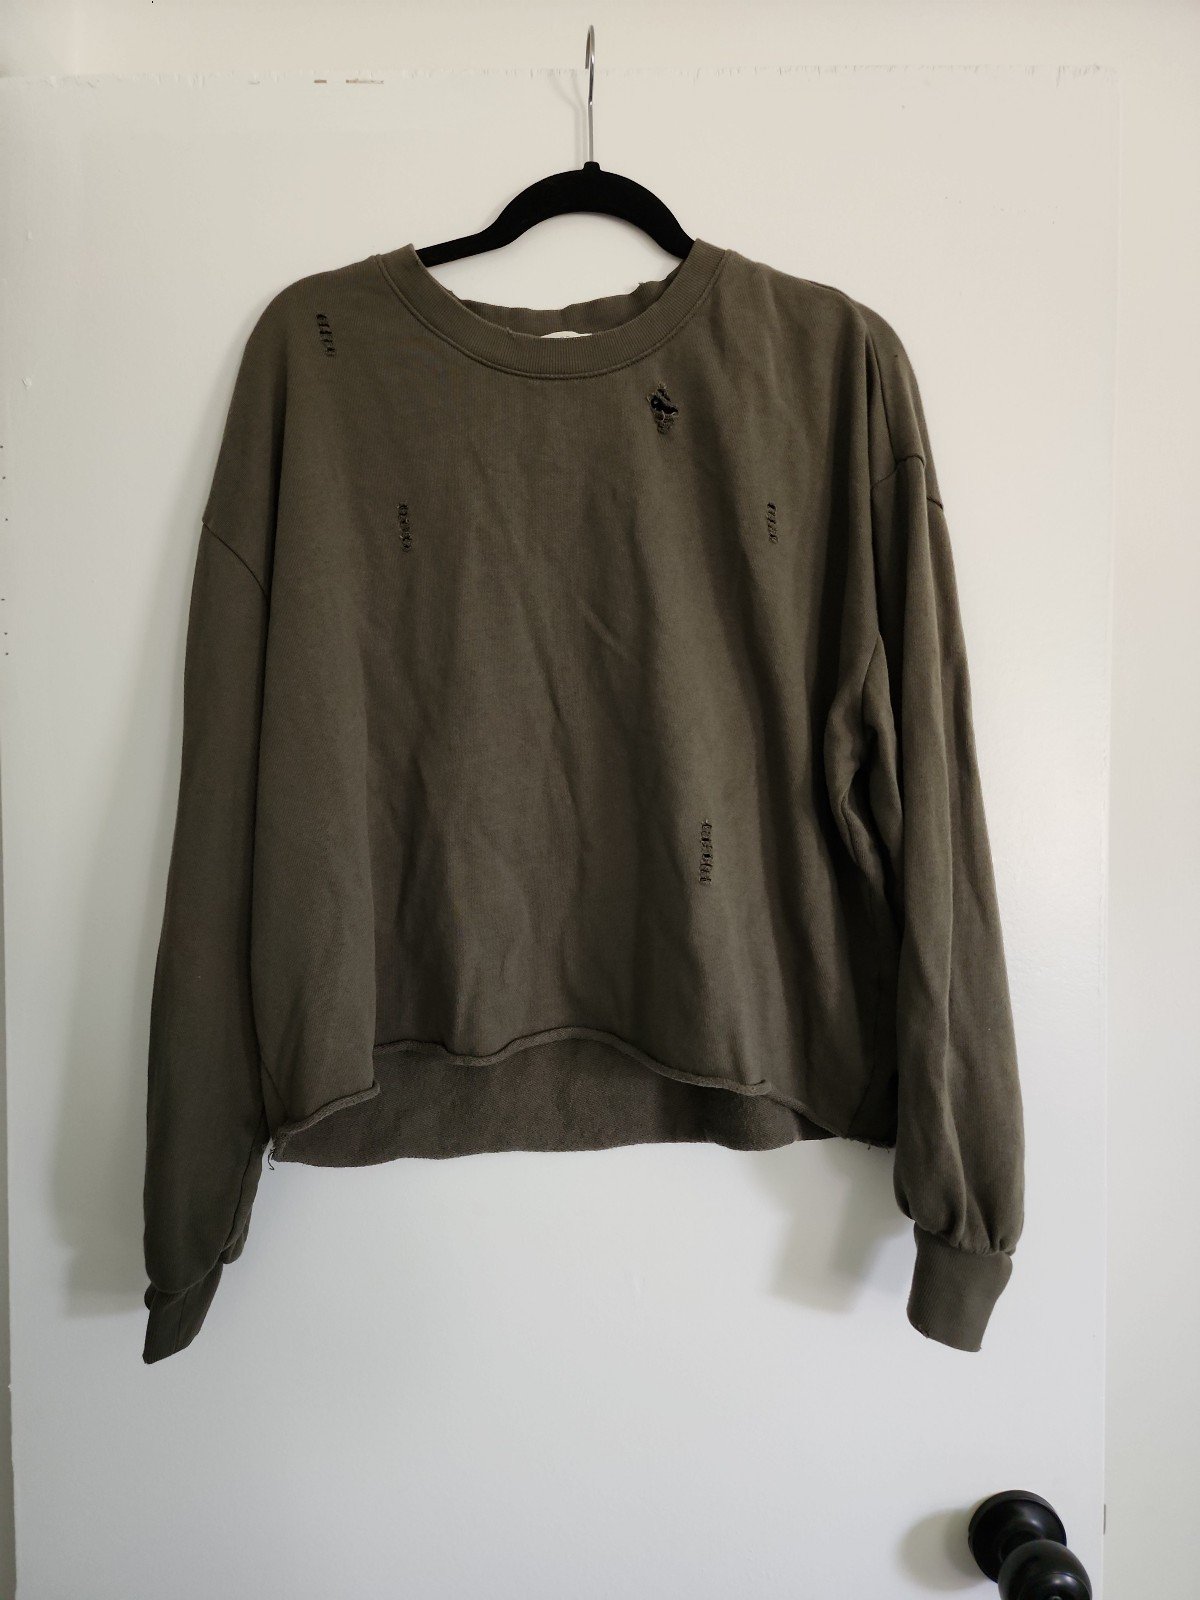 Promotions  Z Supply Distressed Cropped Sweatshirt Olive Green Size XL IEEqYqkdH Buying Cheap